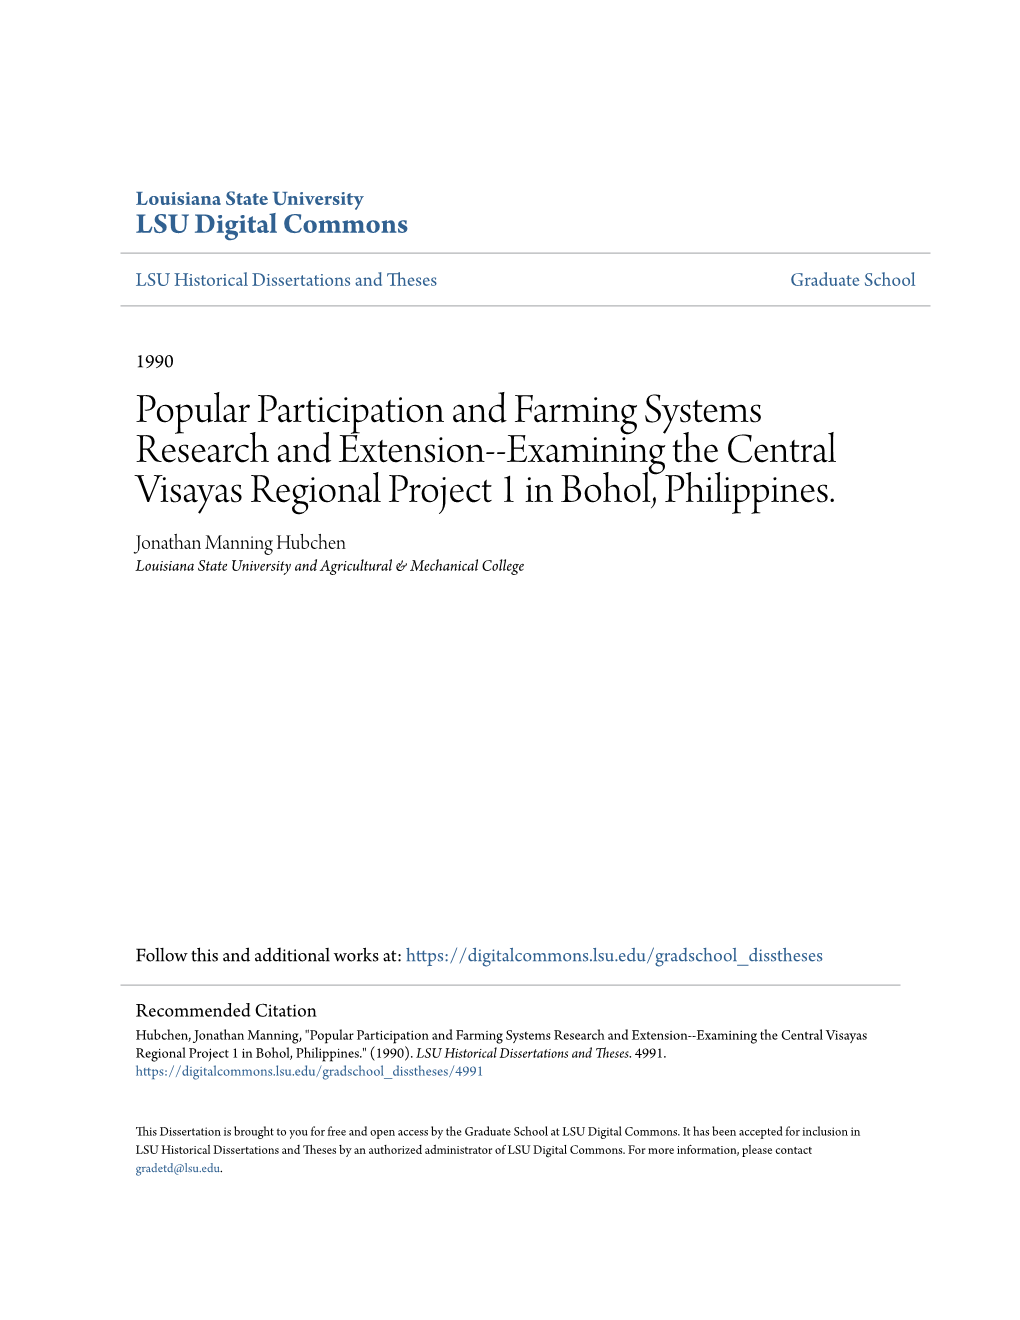 Examining the Central Visayas Regional Project 1 in Bohol, Philippines